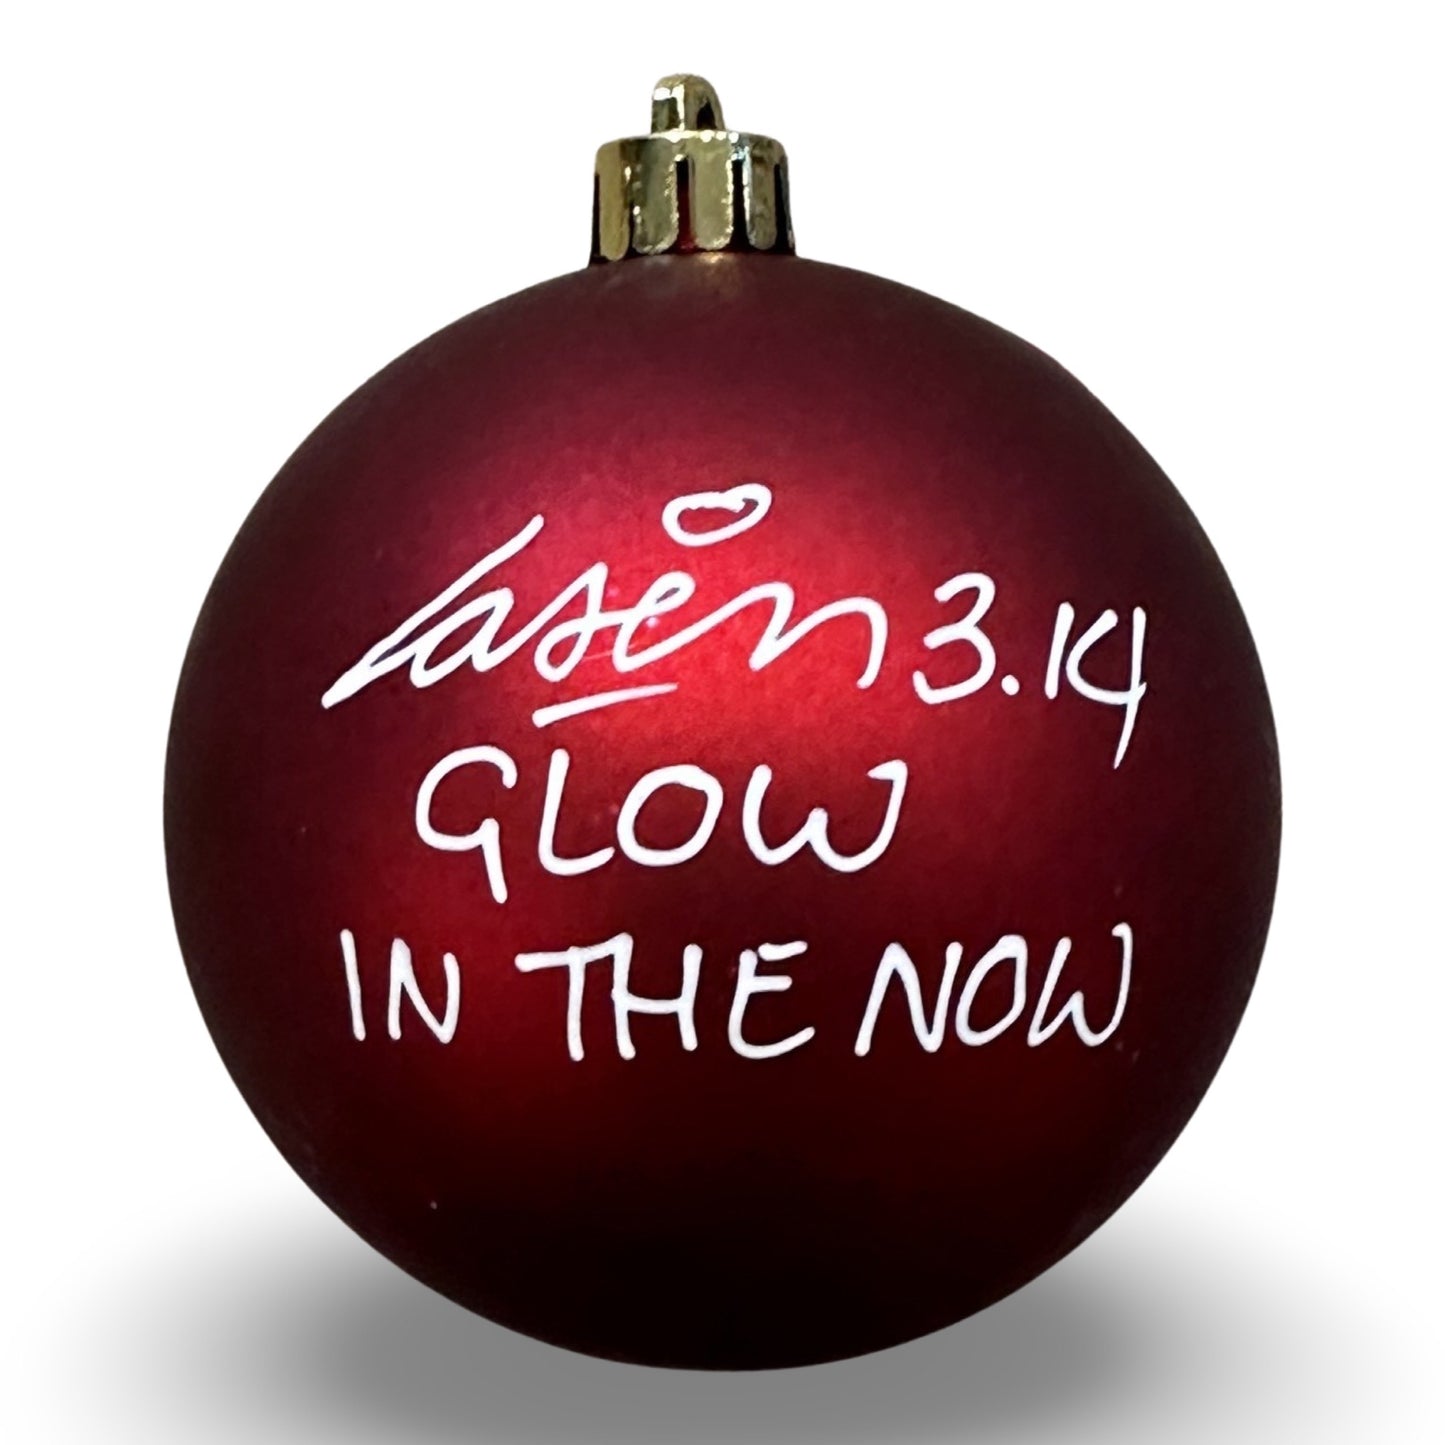 Glow In the Now | Laser 3.14 x Famous Amsterdam Christmas Ball Ornament